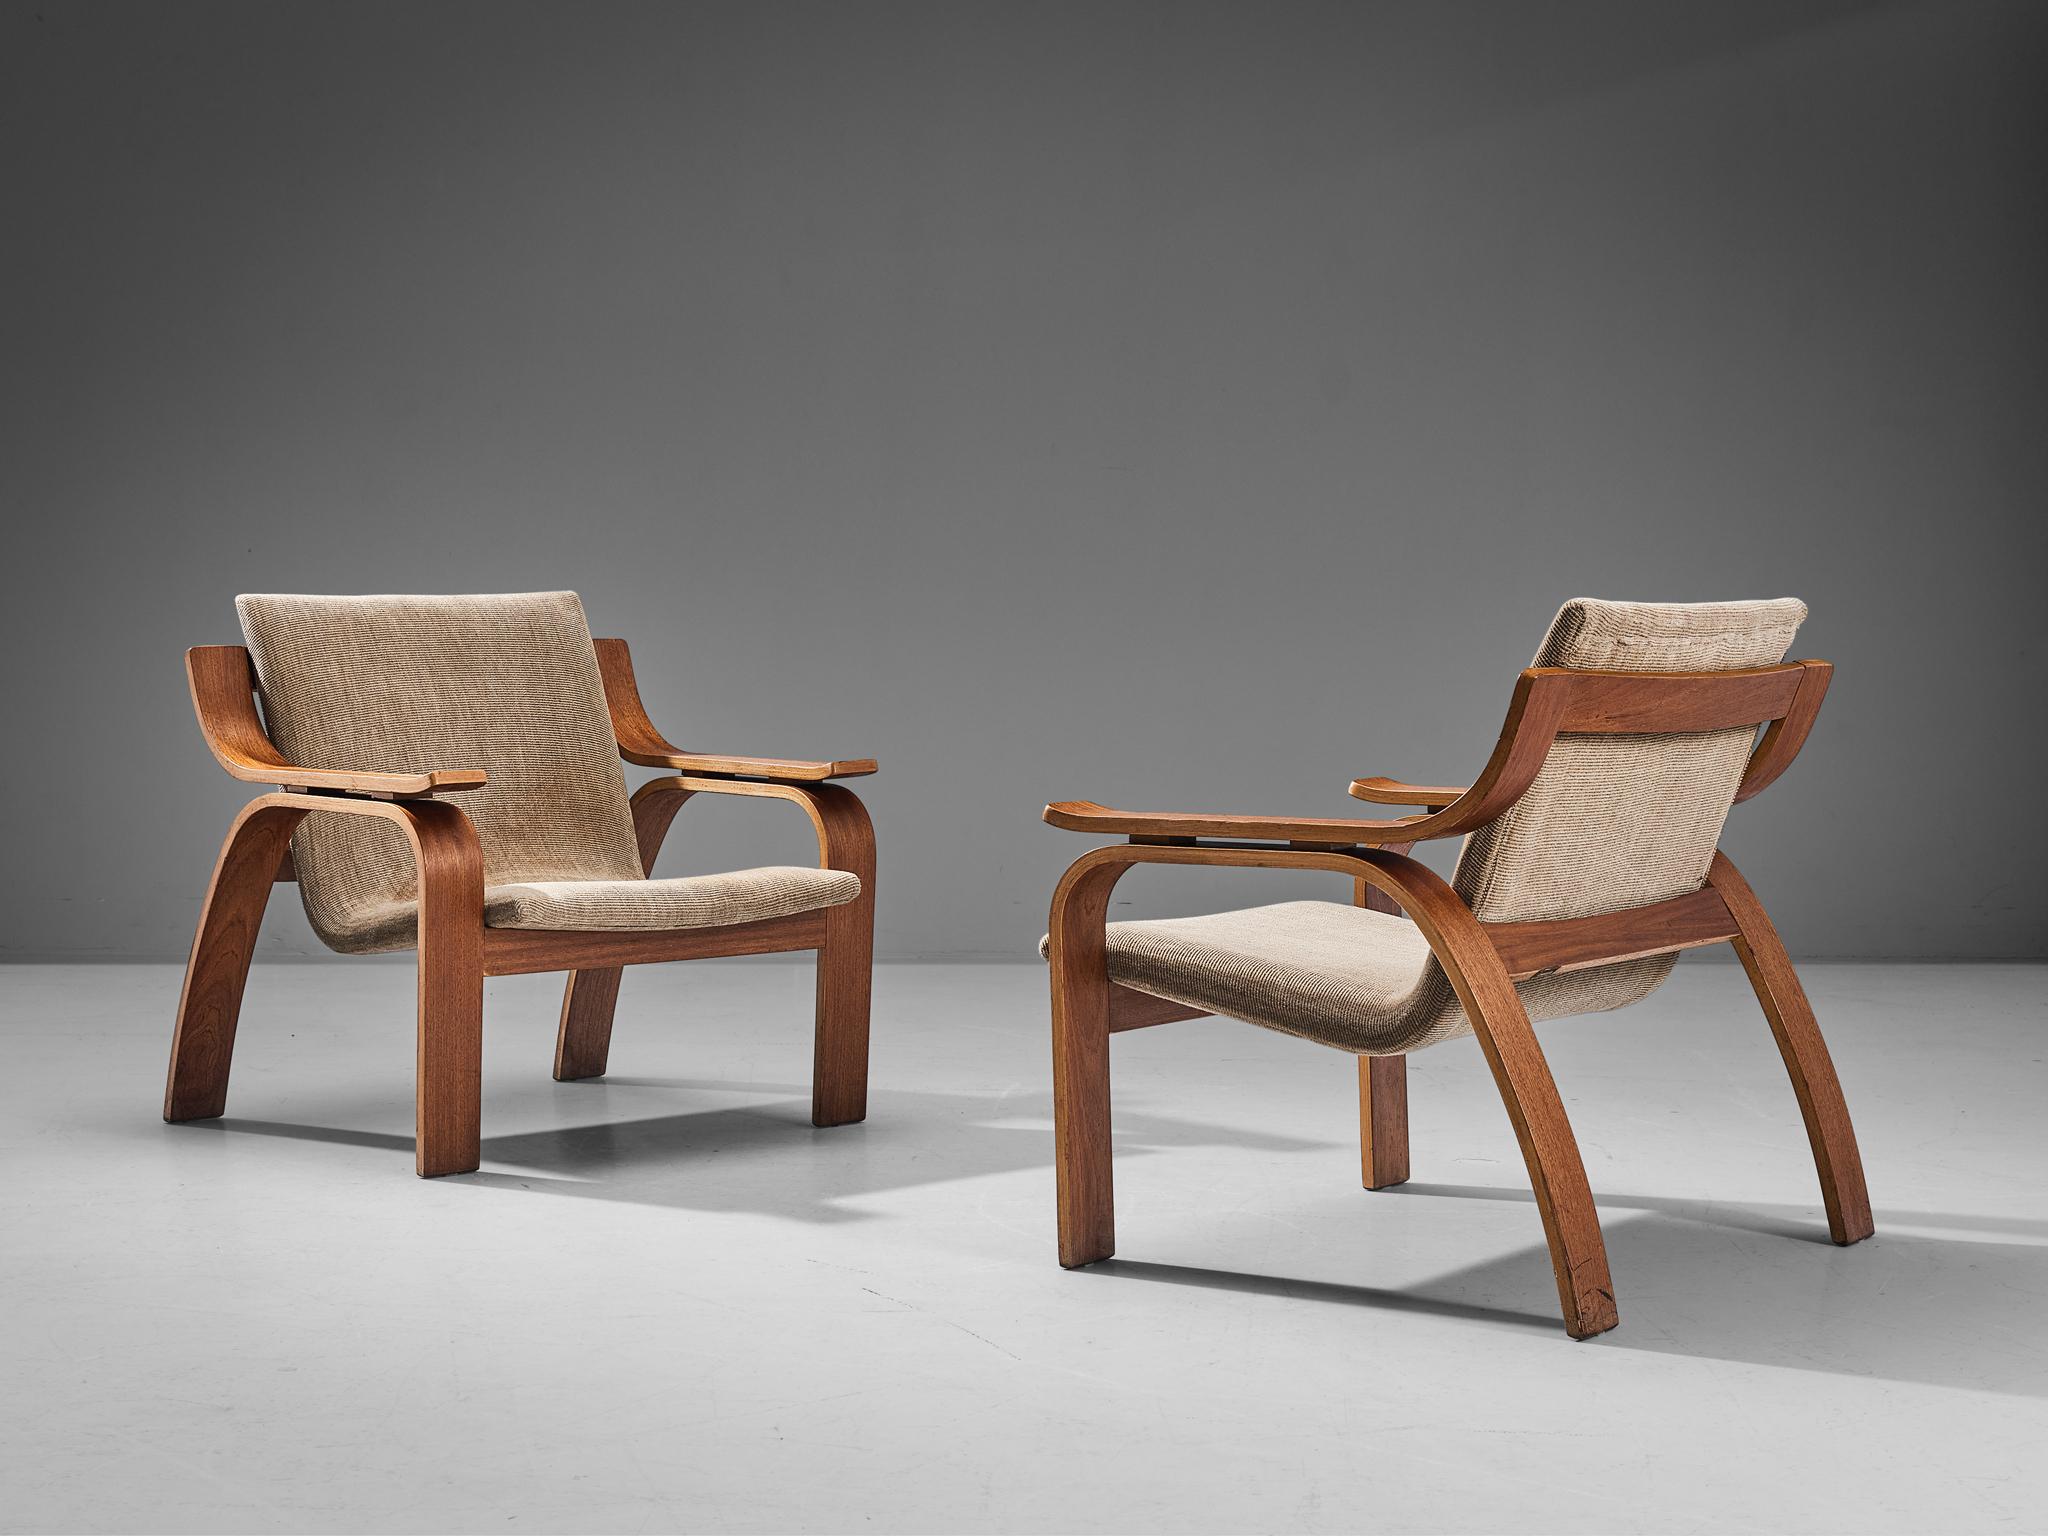 Czech Bentwood Pair of Lounge Chairs in Mahogany and Sand Upholstery